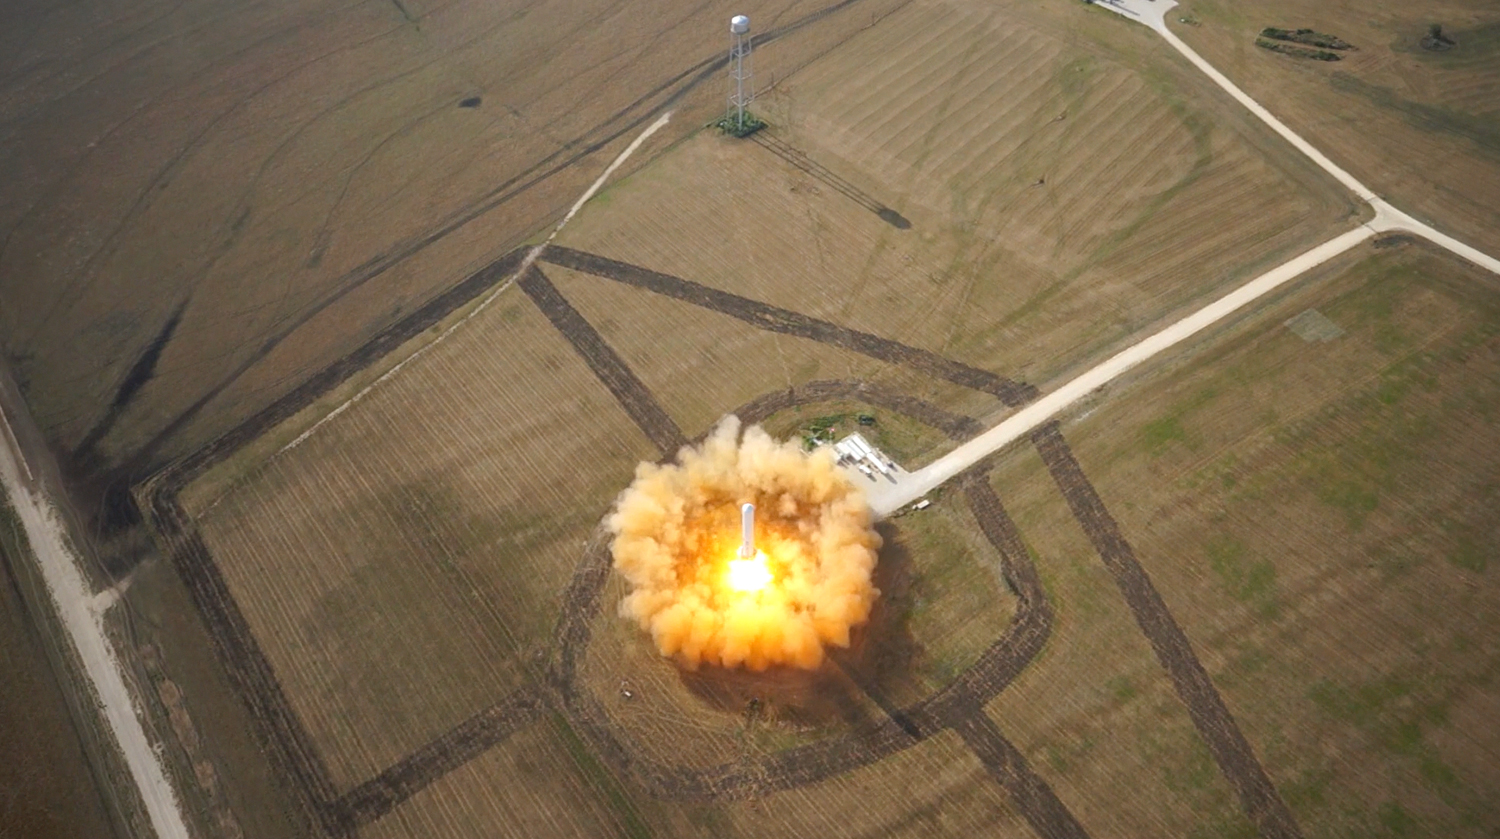 SpaceX's reusable rocket prototype, Grasshopper, completes a 325 meter hop on June 14, 2013 before smoothly landing back on the pad.